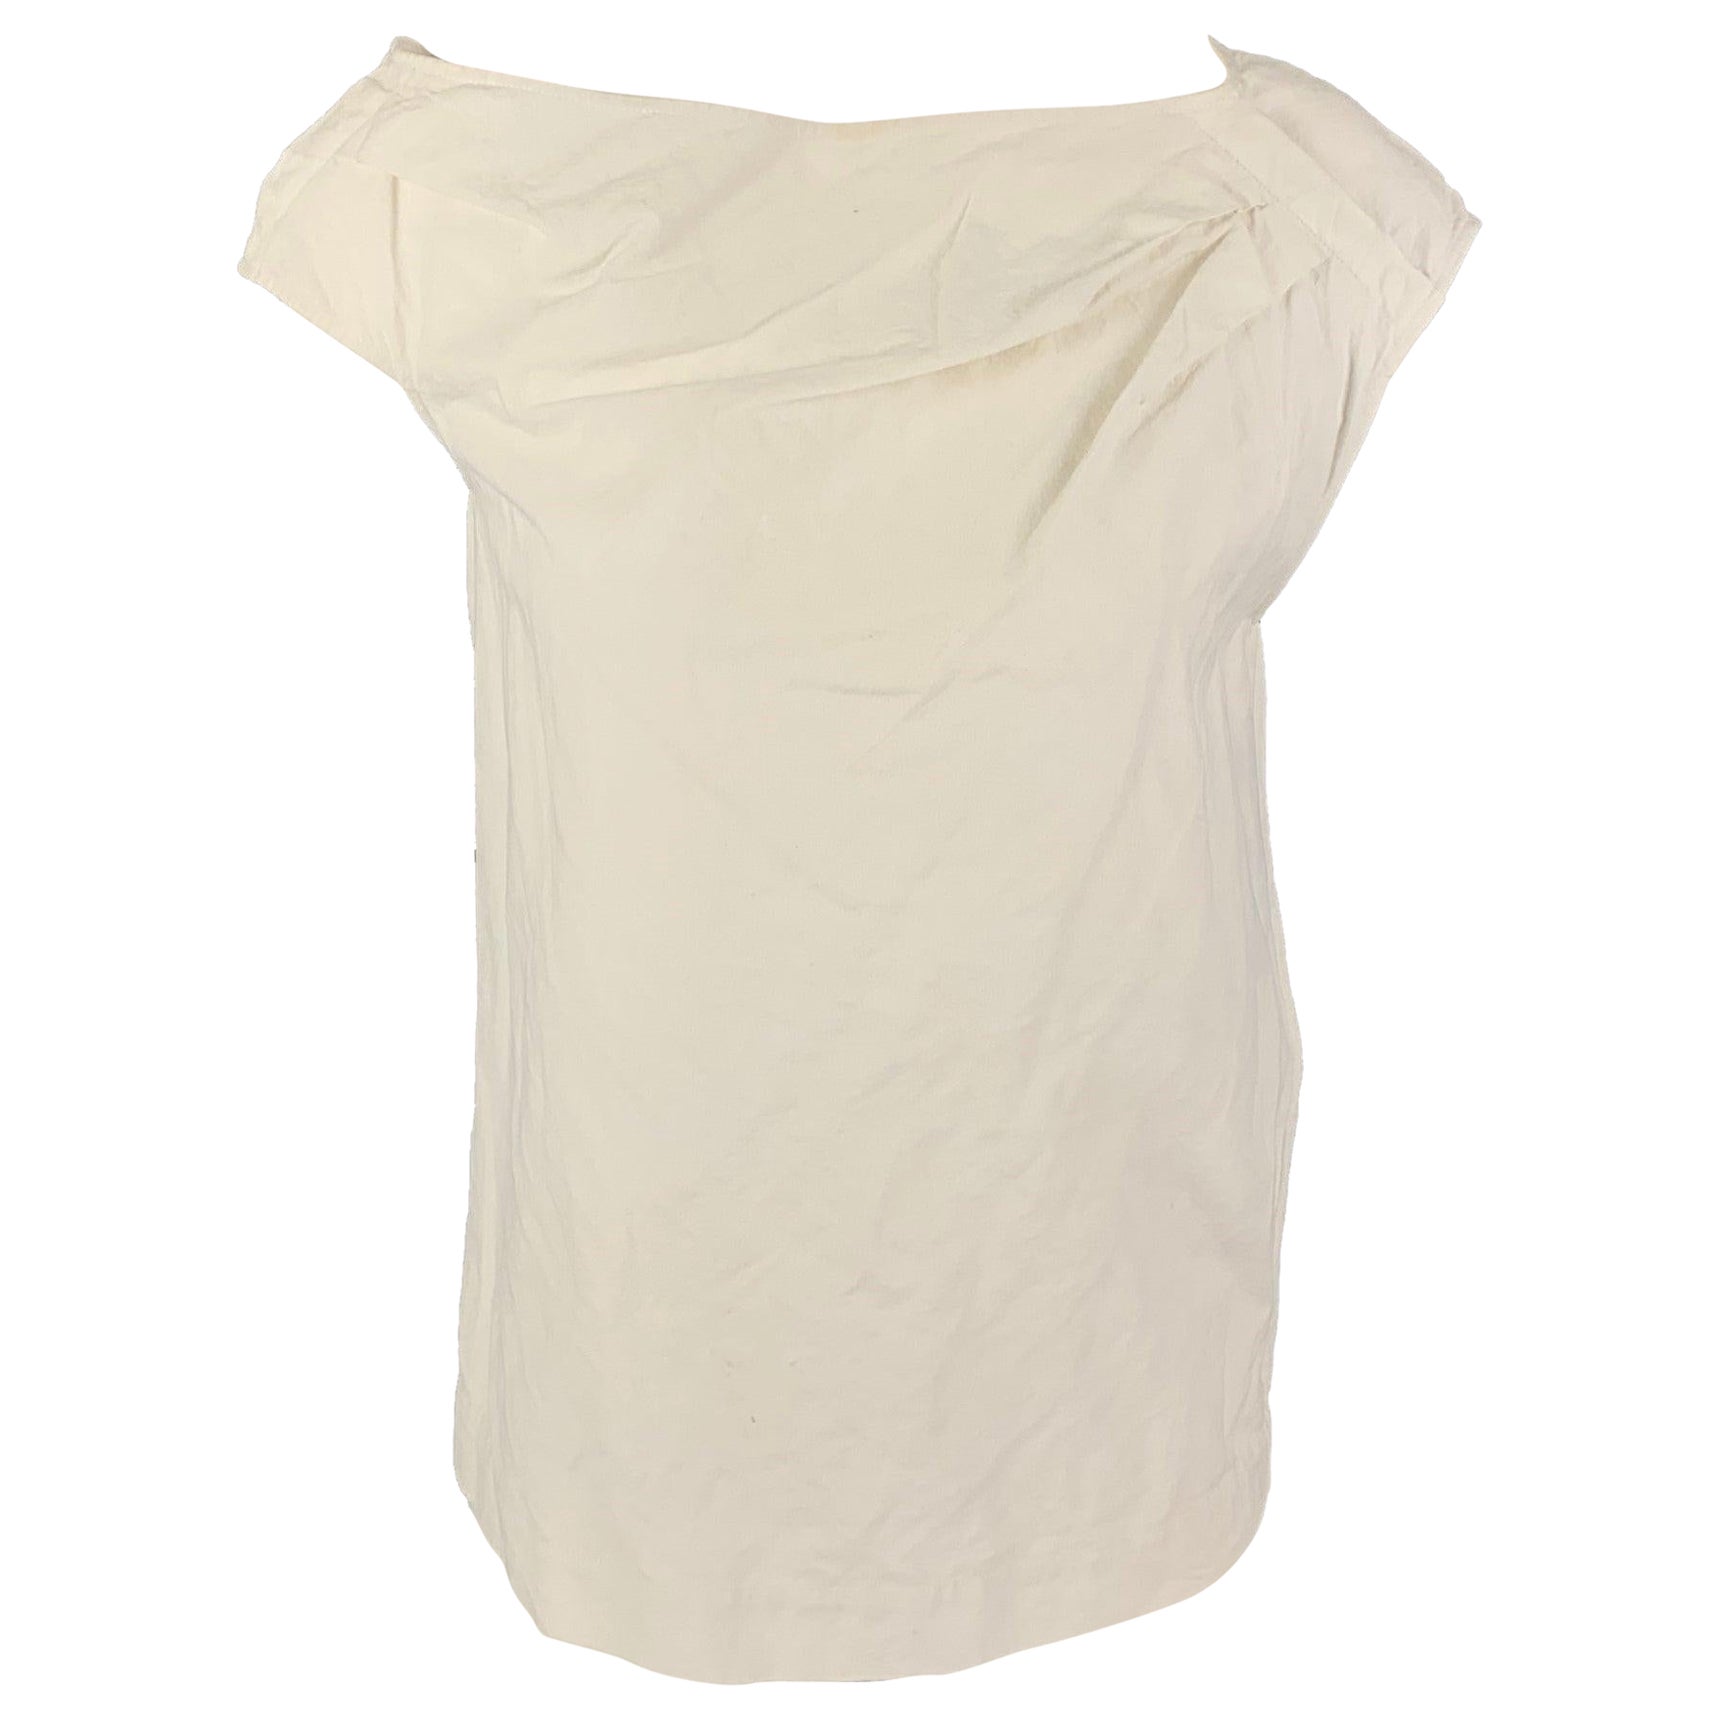 ISA ARFEN Size 6 Cream Cotton Blend Wrinkled A-Line Blouse For Sale